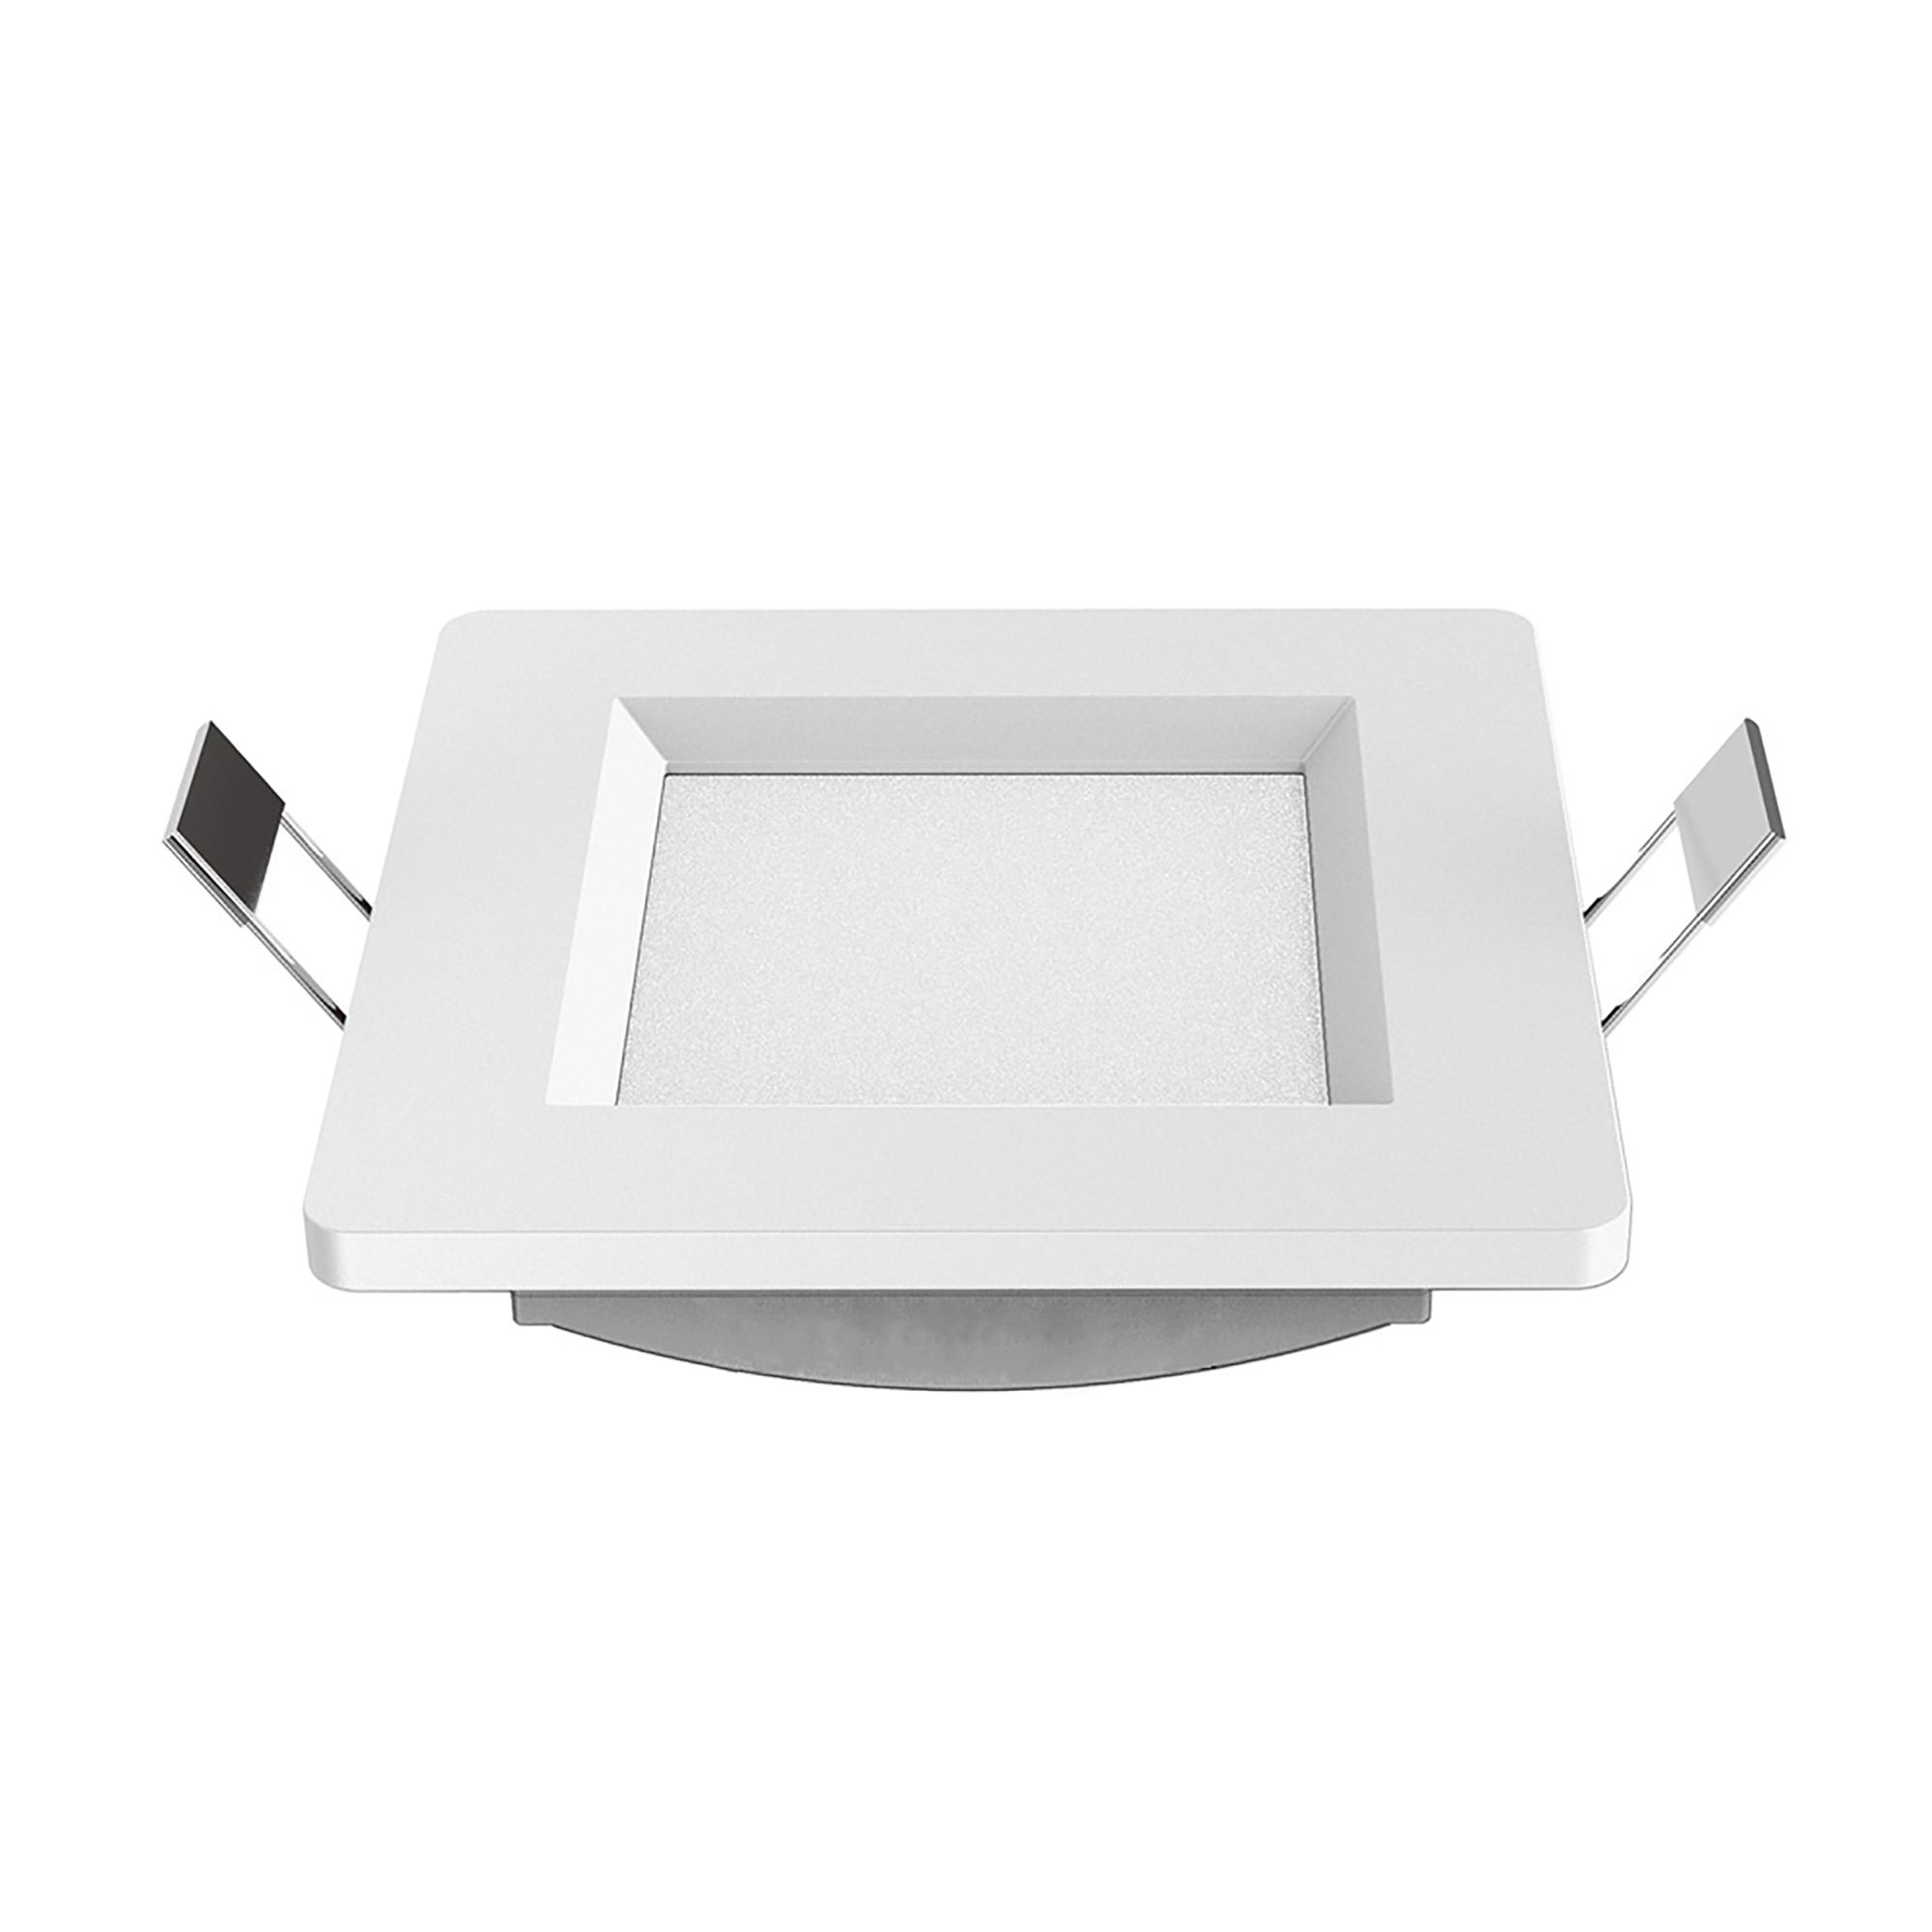 205101  Intego Ultra-Slim Square Small 8W 2700K IP42 Cut-Out 85x85mm